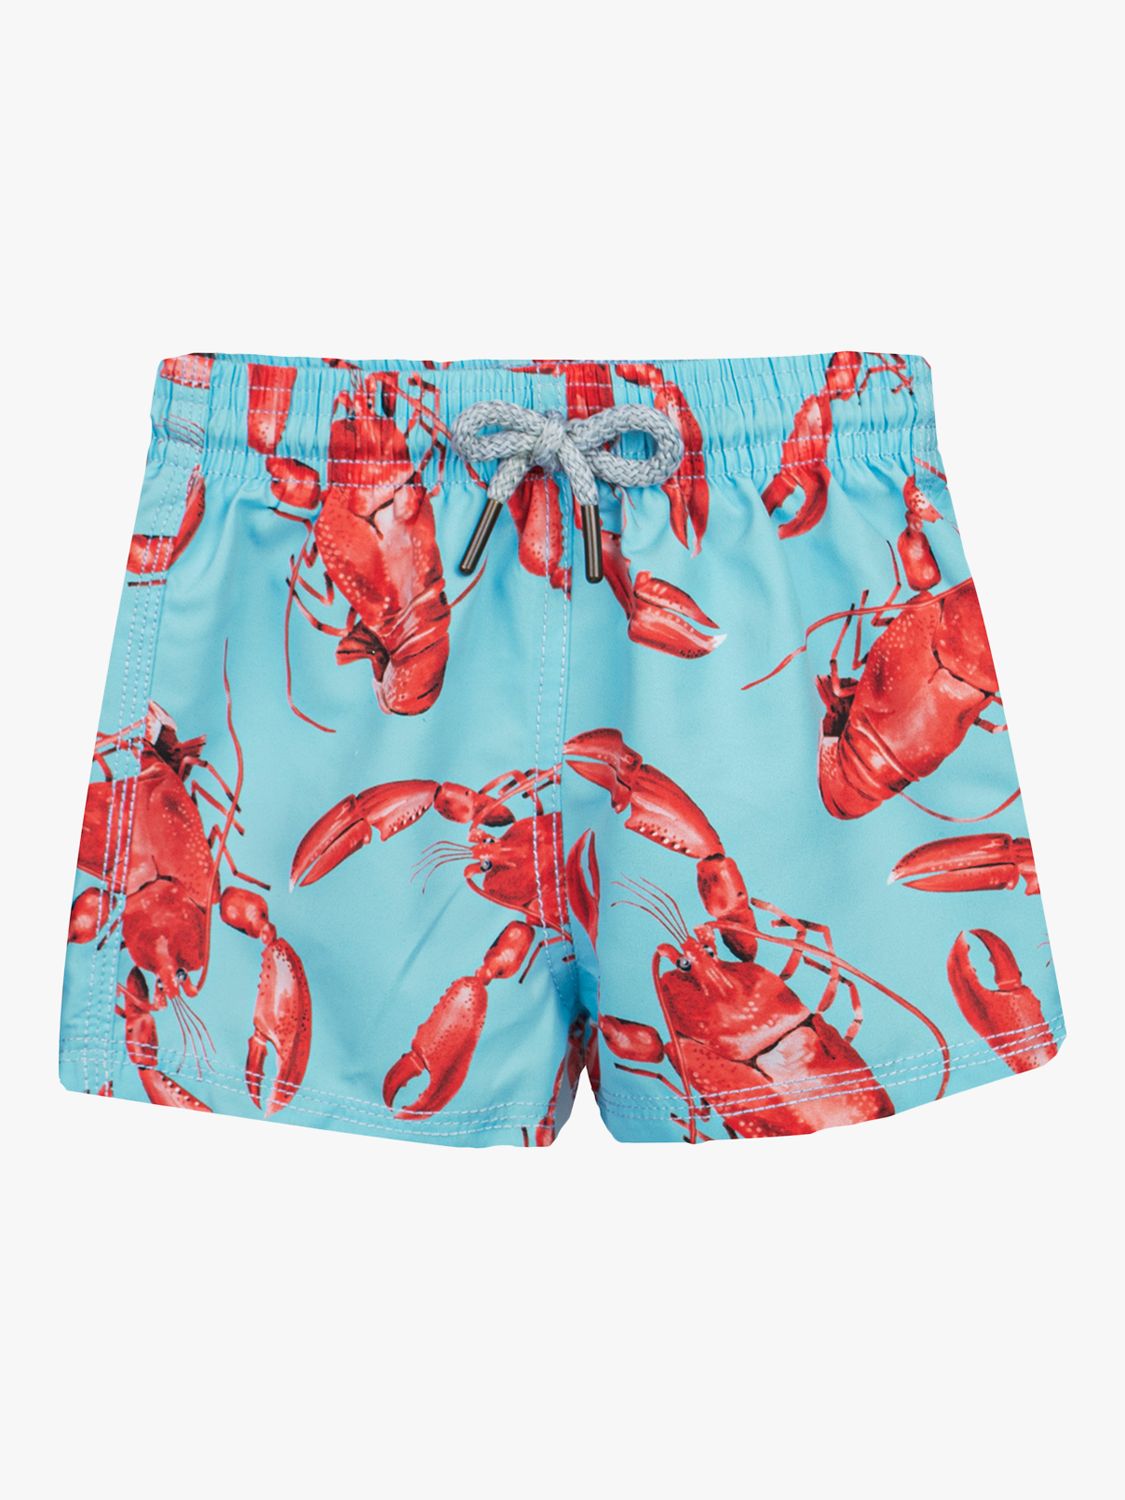 Trotters Baby Lobster Print Swim Shorts, Aqua/Red, 3-6 months